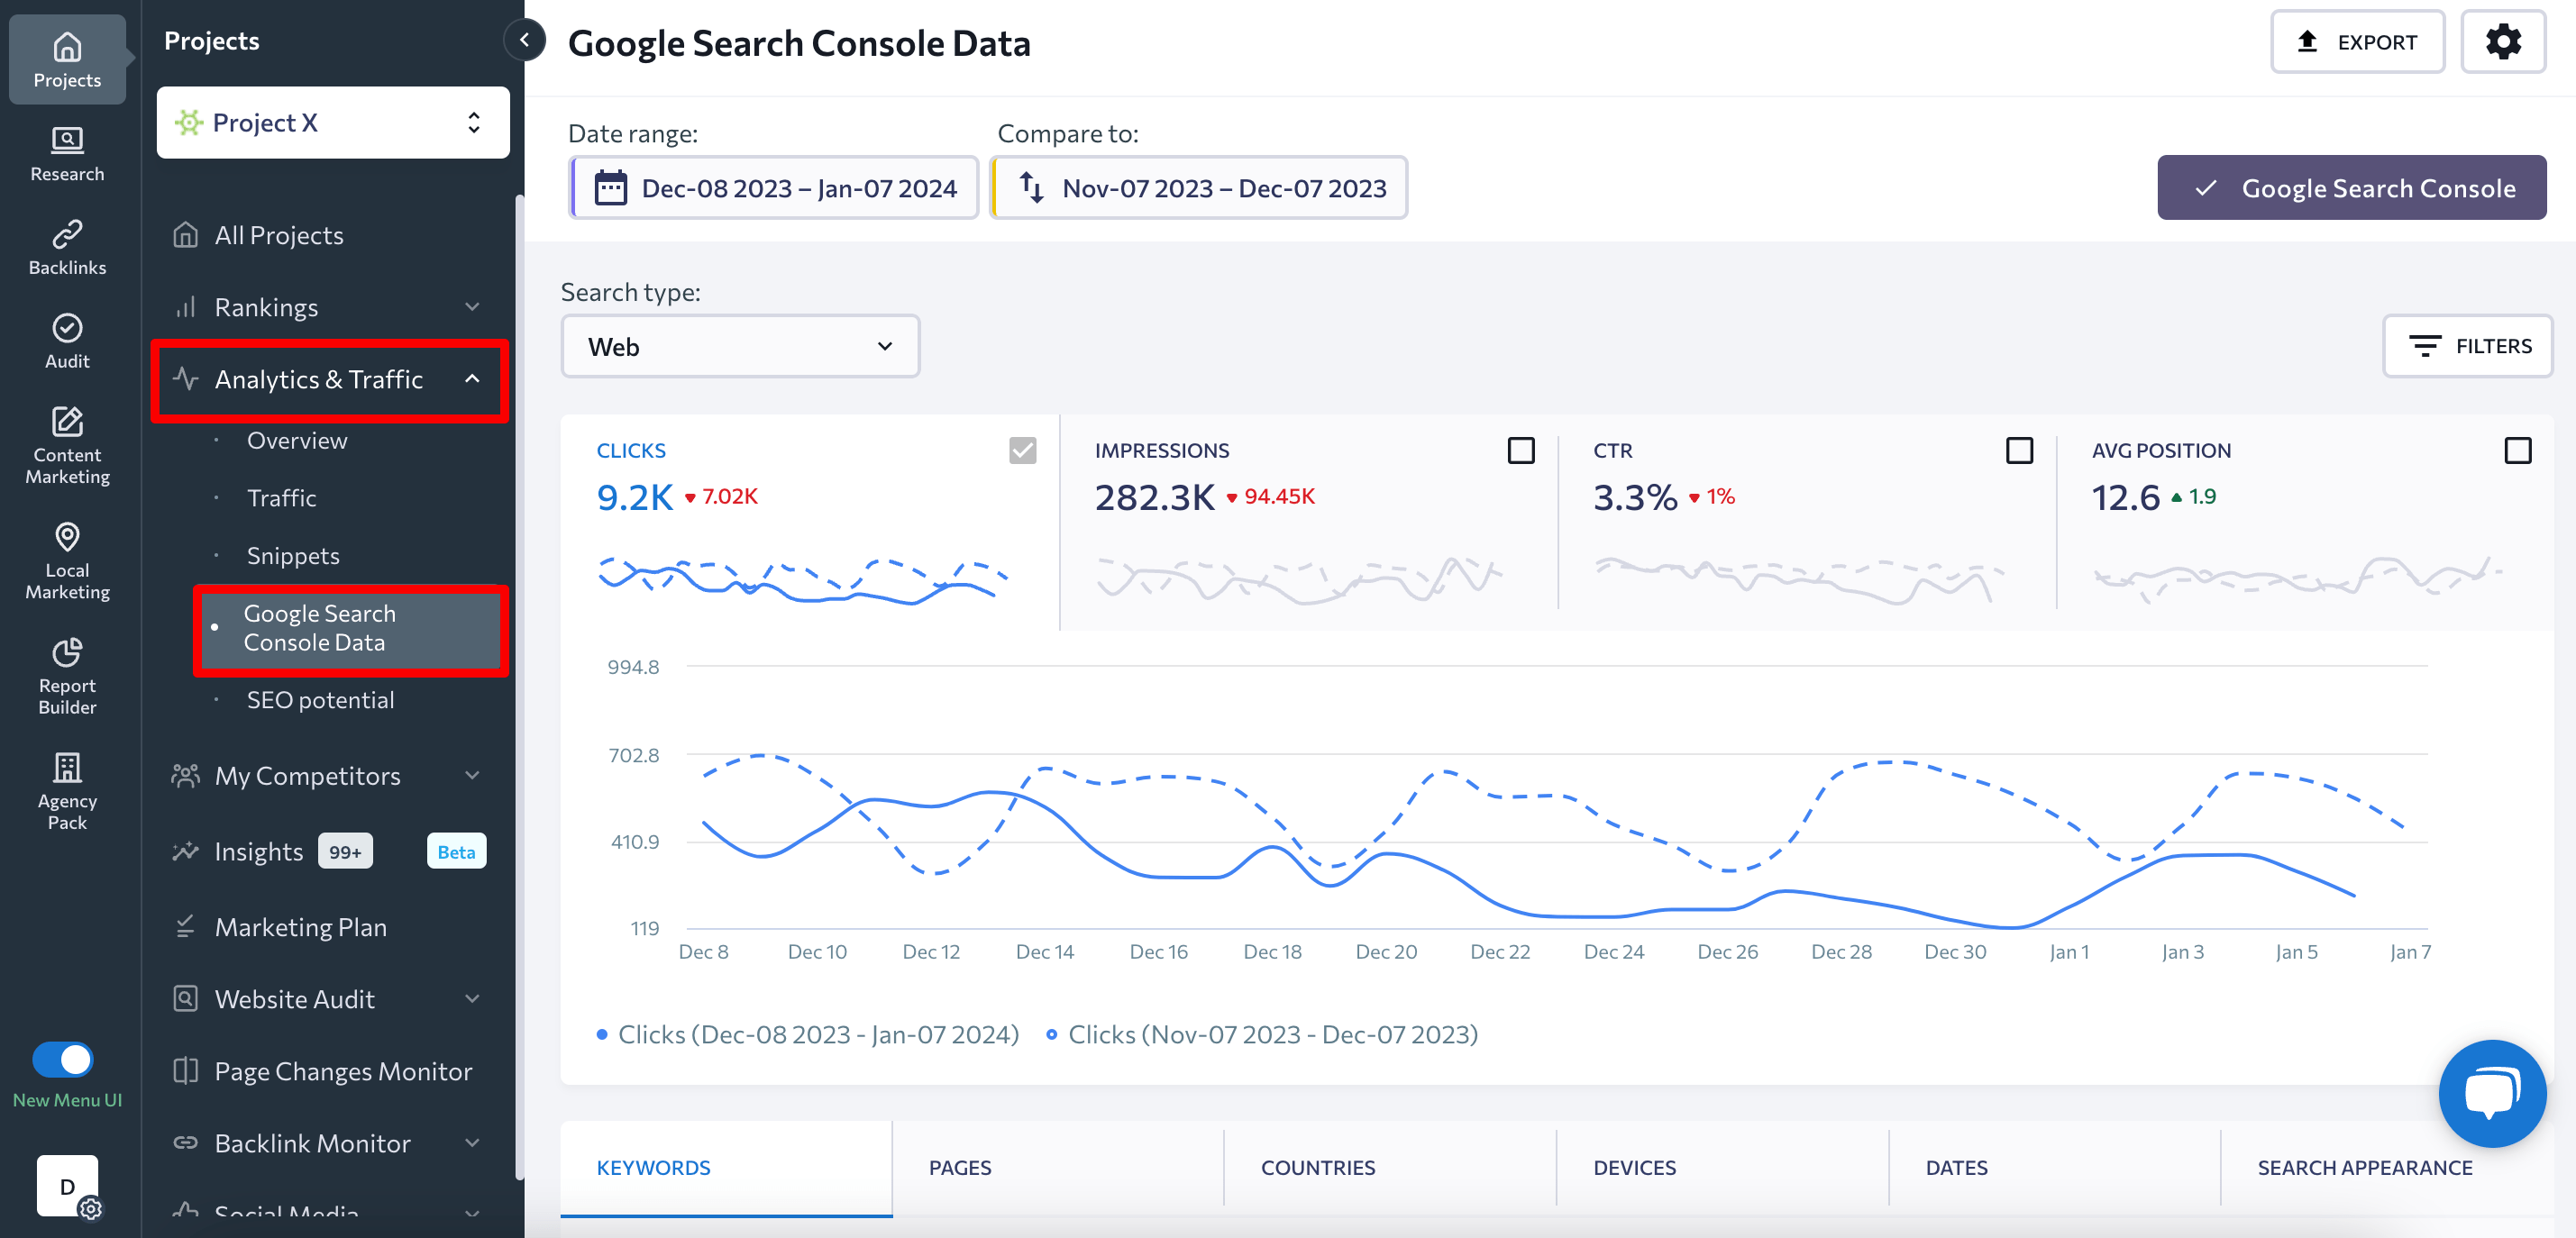 SE Ranking's Analytics and Traffic section